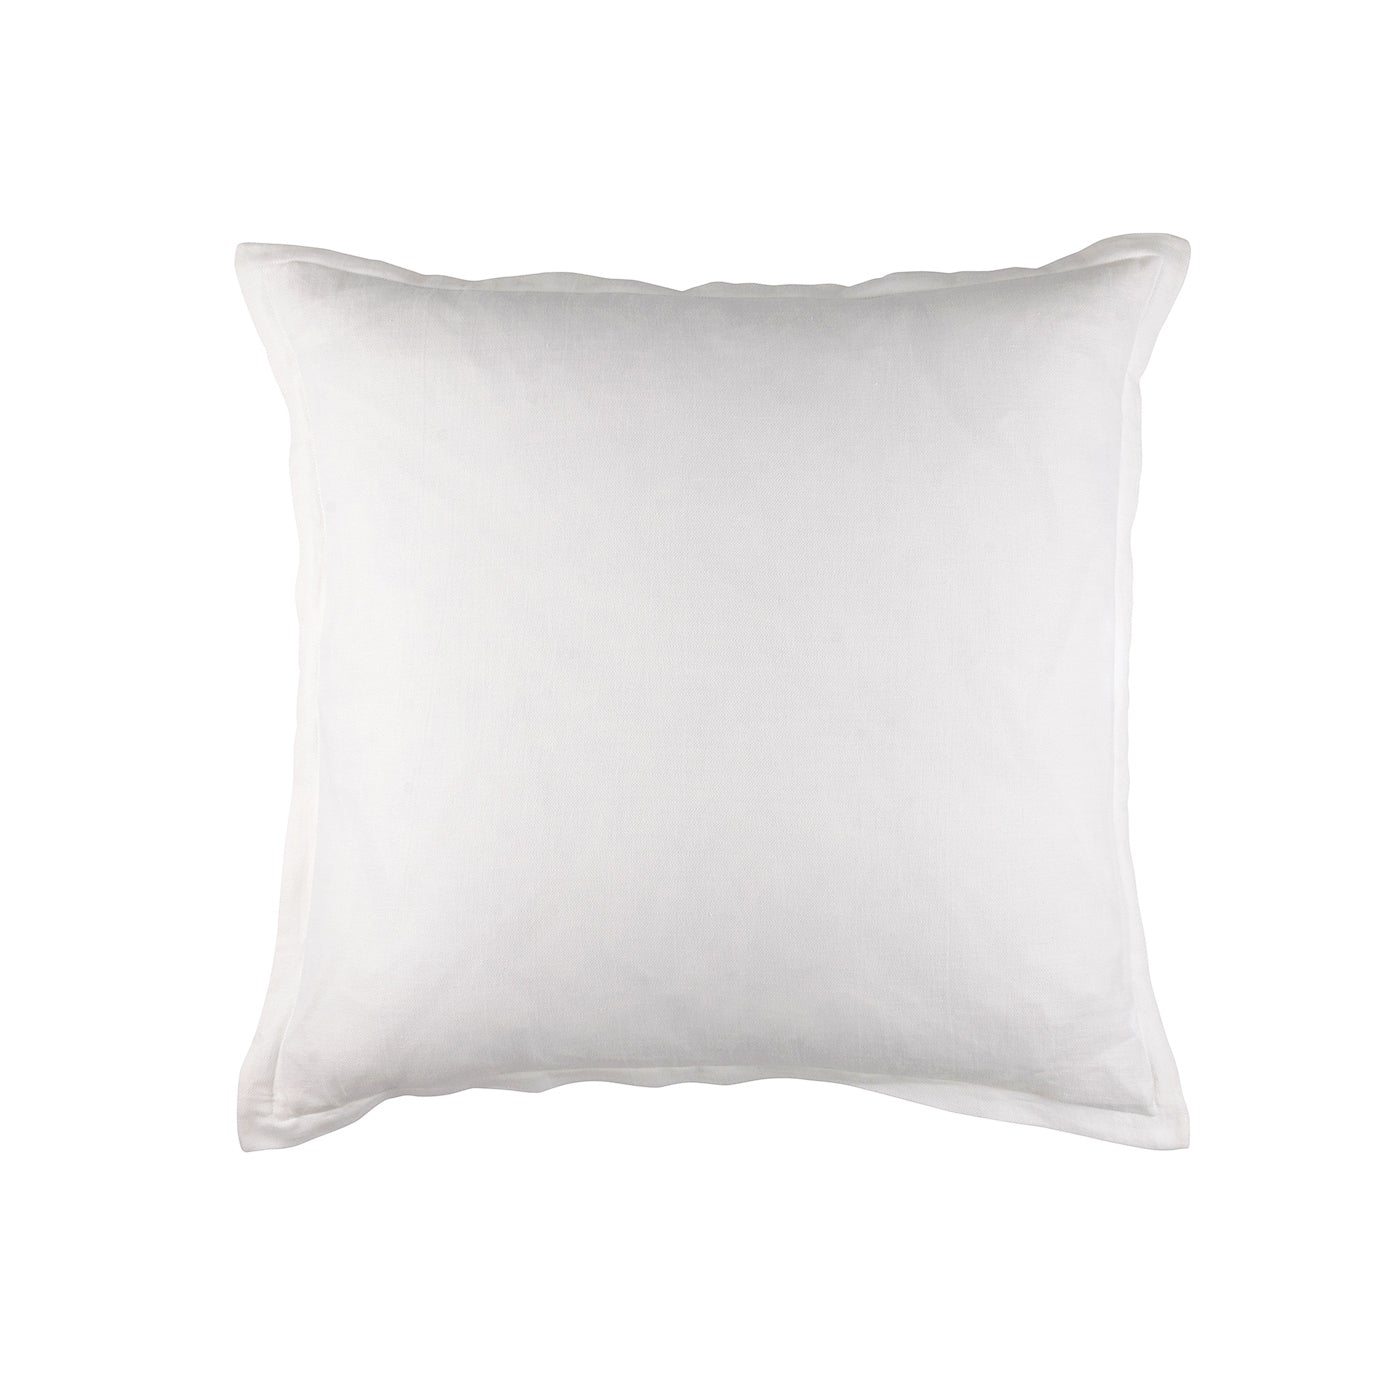 Rain White Euro Pillow by Lili Alessandra | Fig Linens and Home